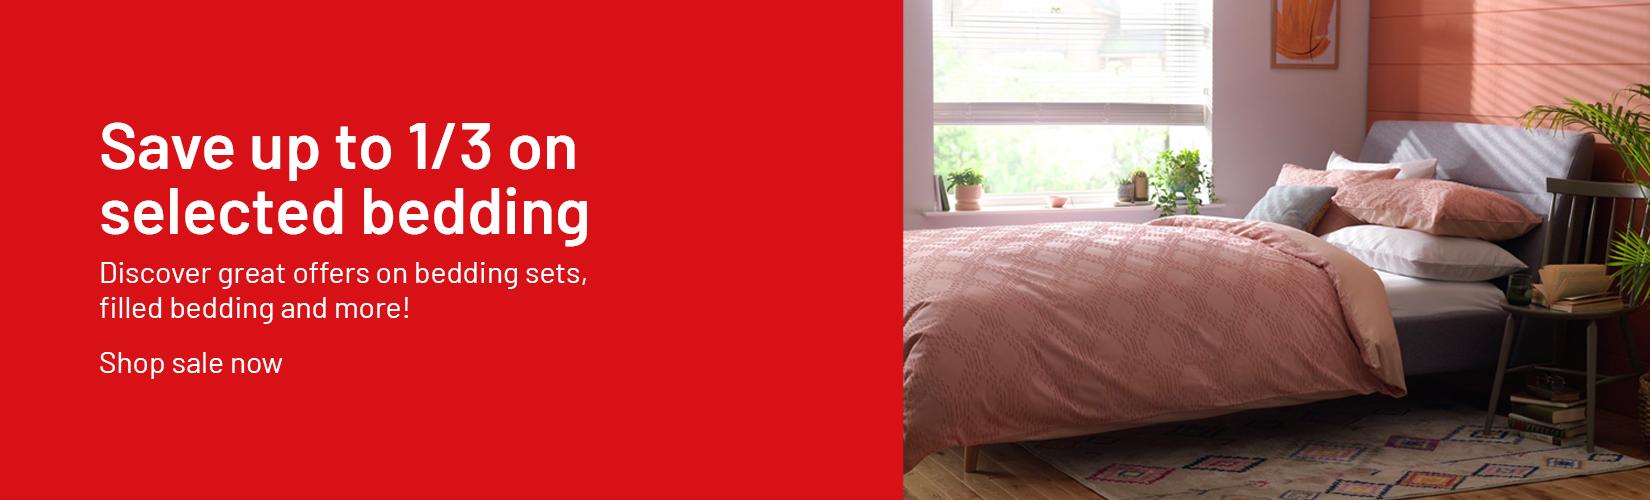  Save up to 1/3 on selected bedding. Discover great offers on bedding sets, filled bedding and more!